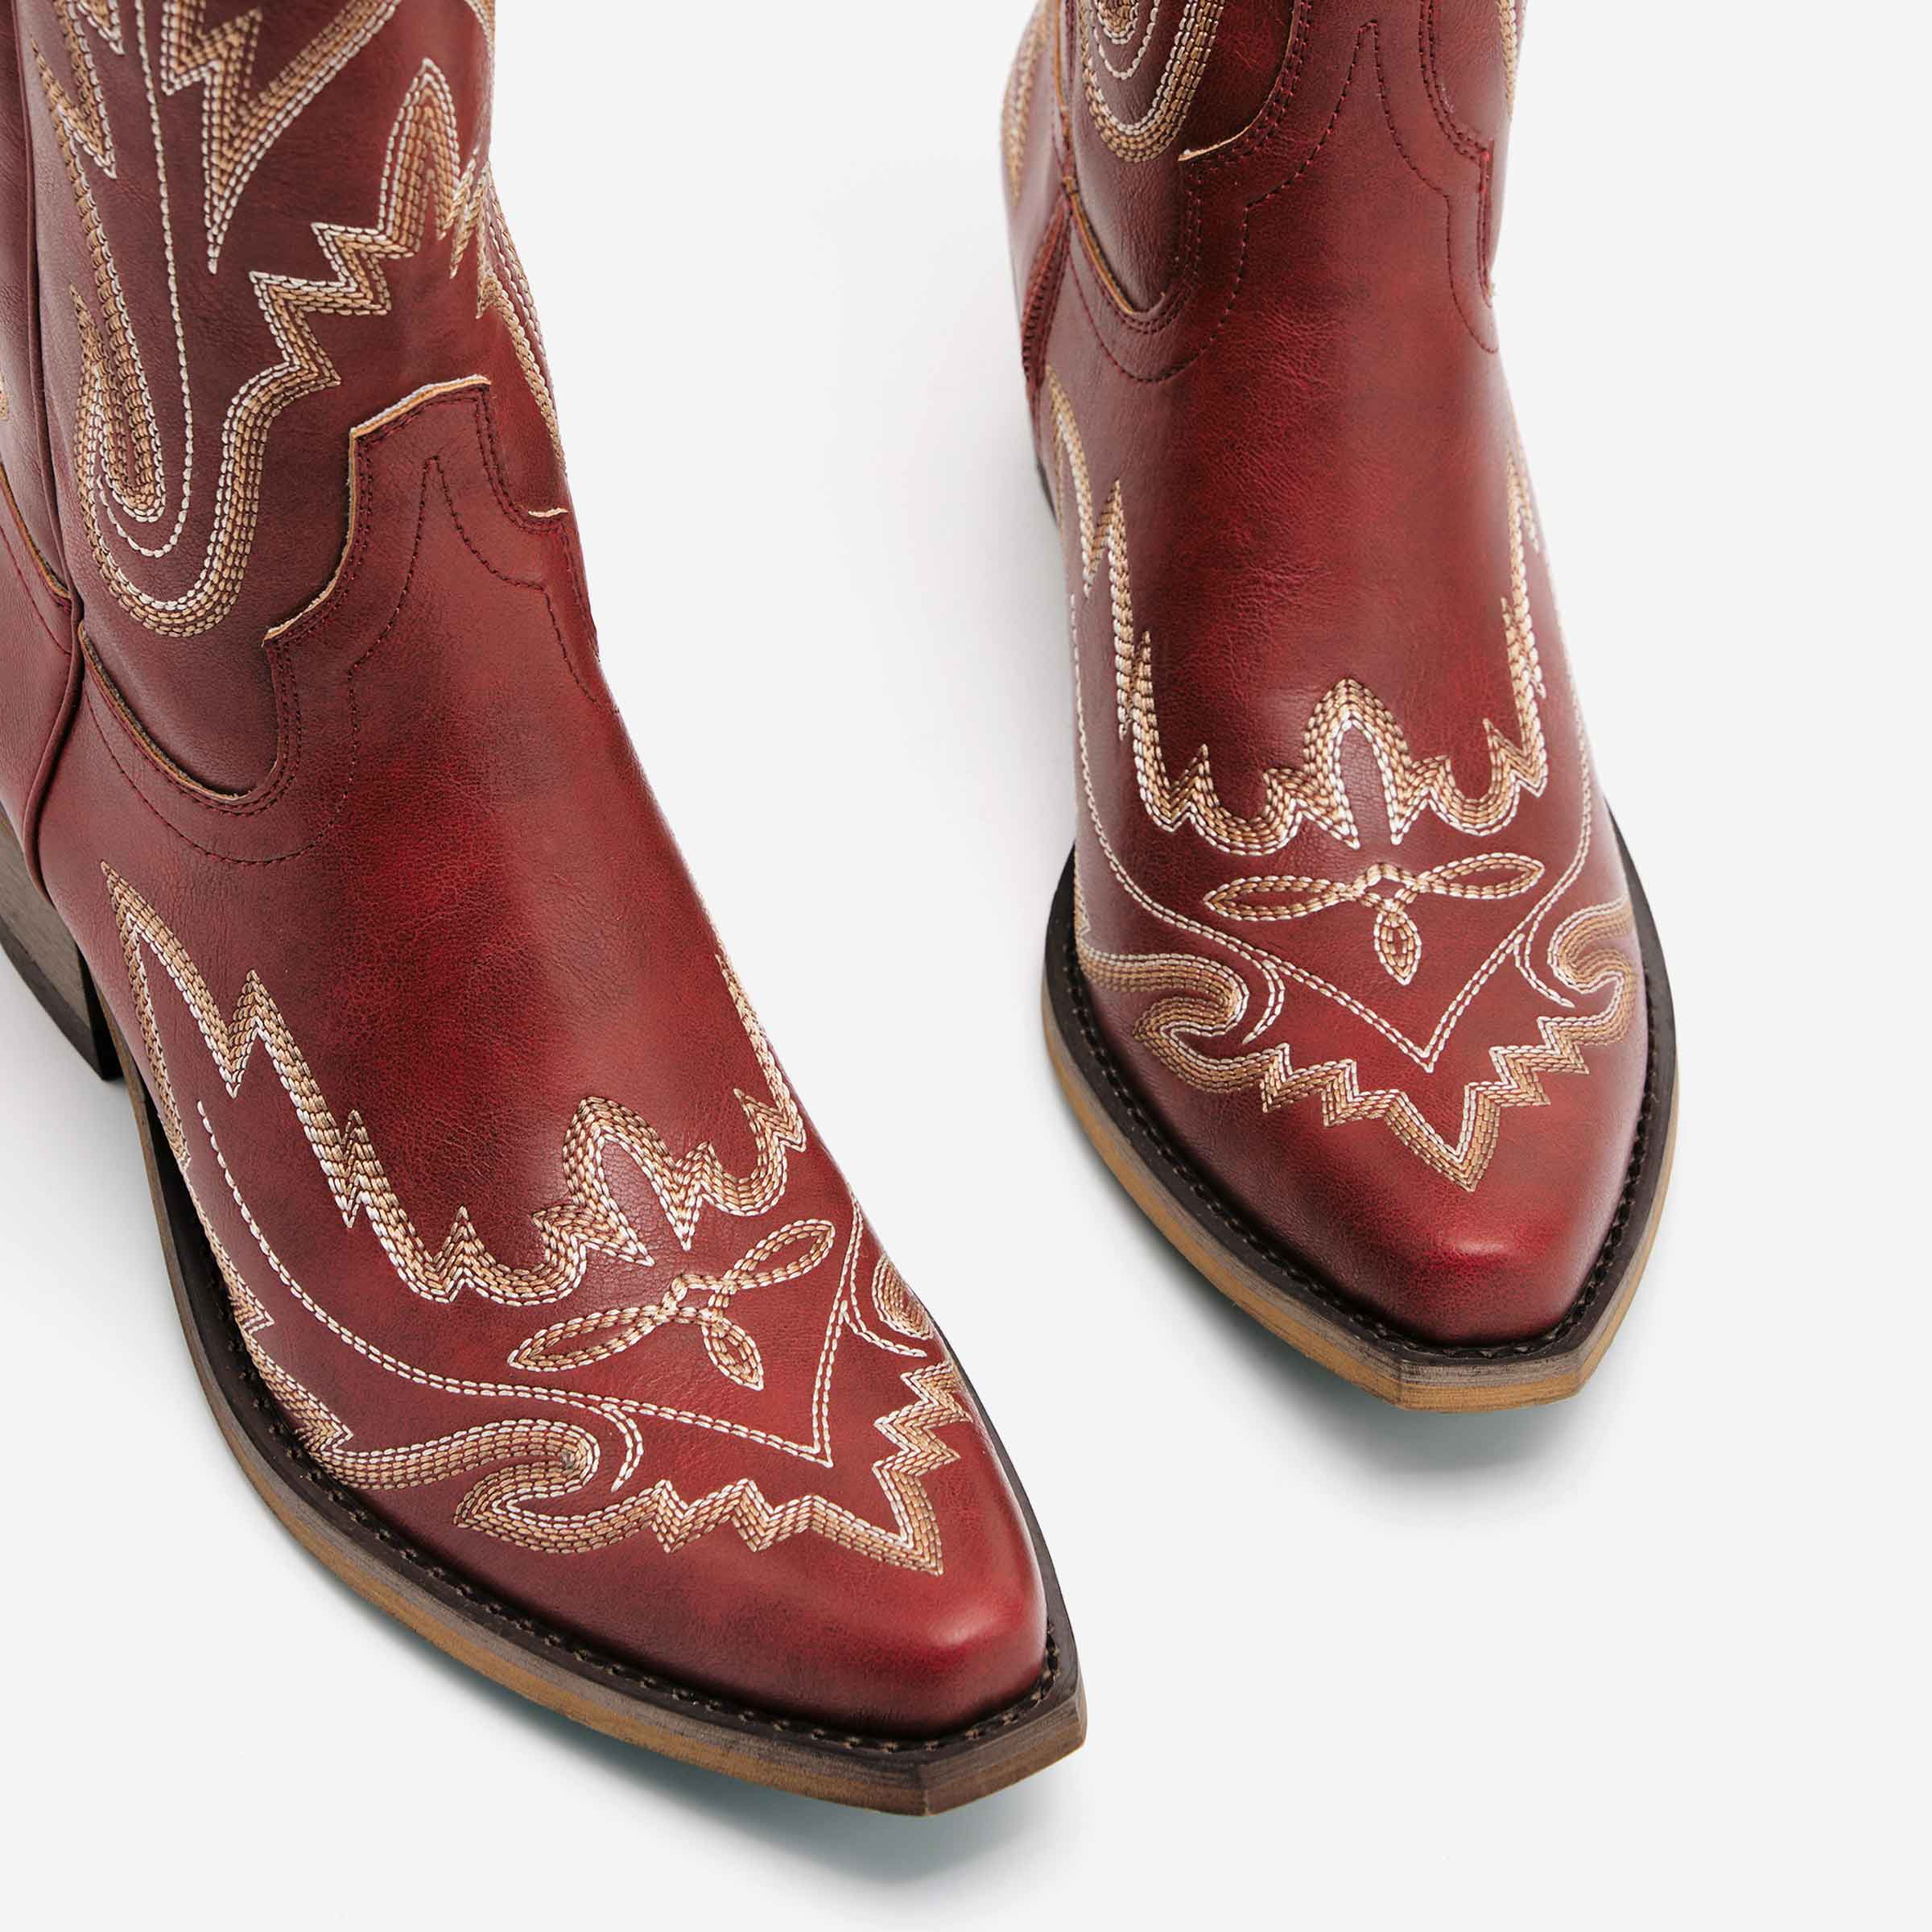 REDTOP Women's Western Cowgirl Boots, Red Embroidered Vintage, Stylish, Flexible